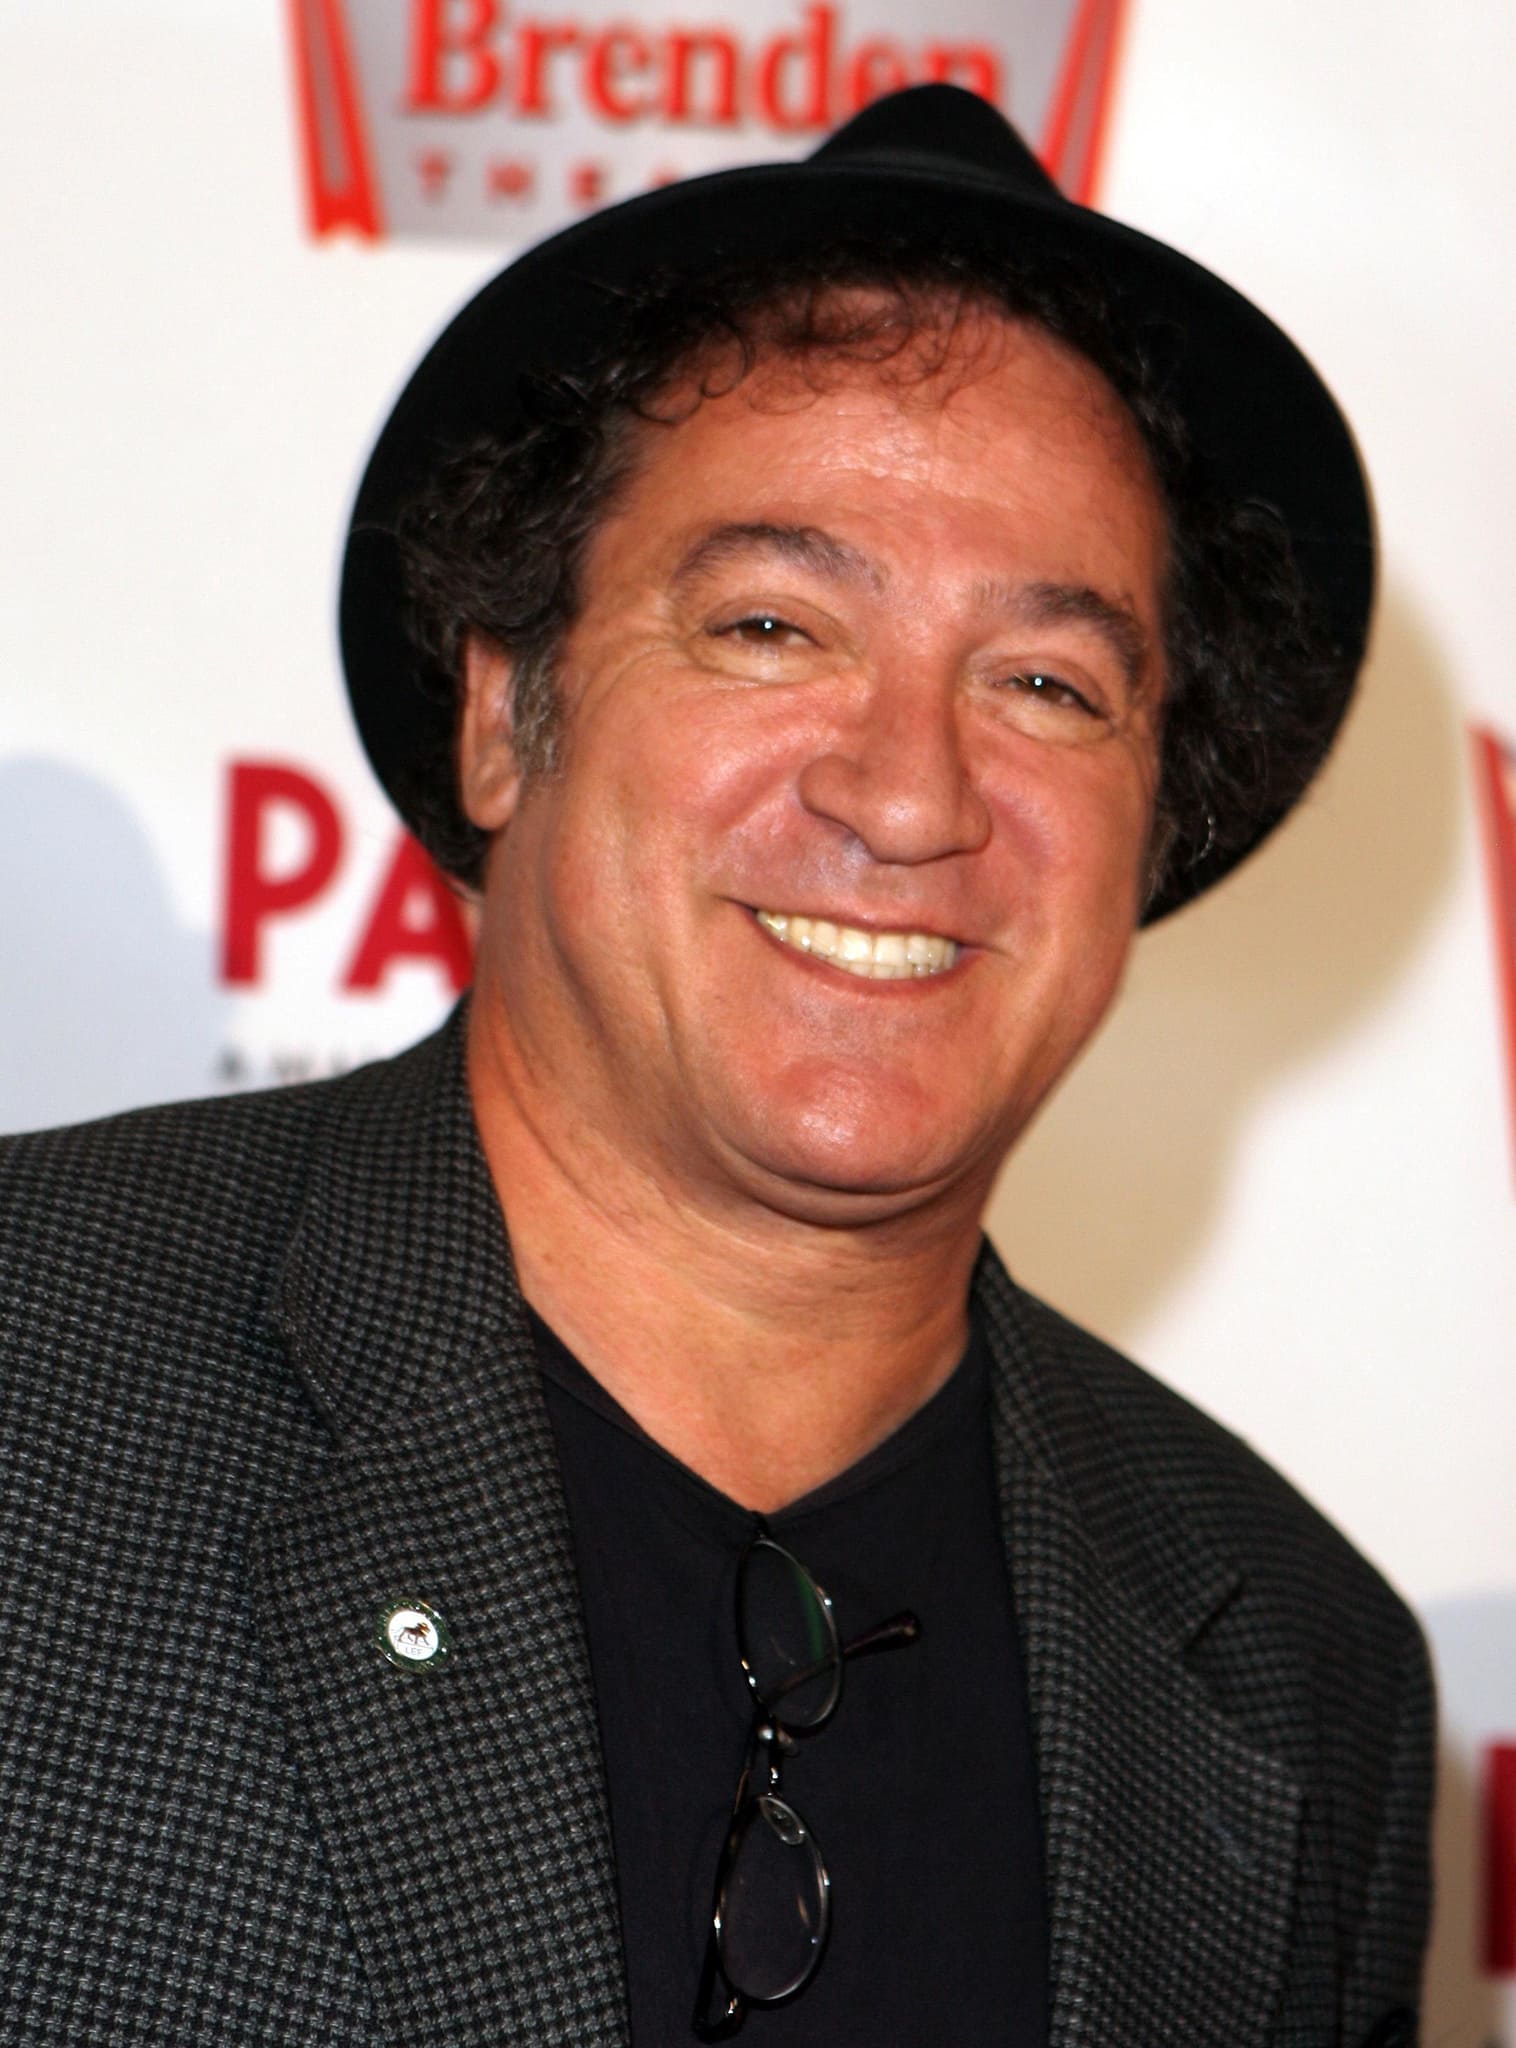 Known for his role as Carmine Ragusa on the hit television sitcom Laverne & Shirley, Eddie Mekka reportedly passed away peacefully at the age of 69